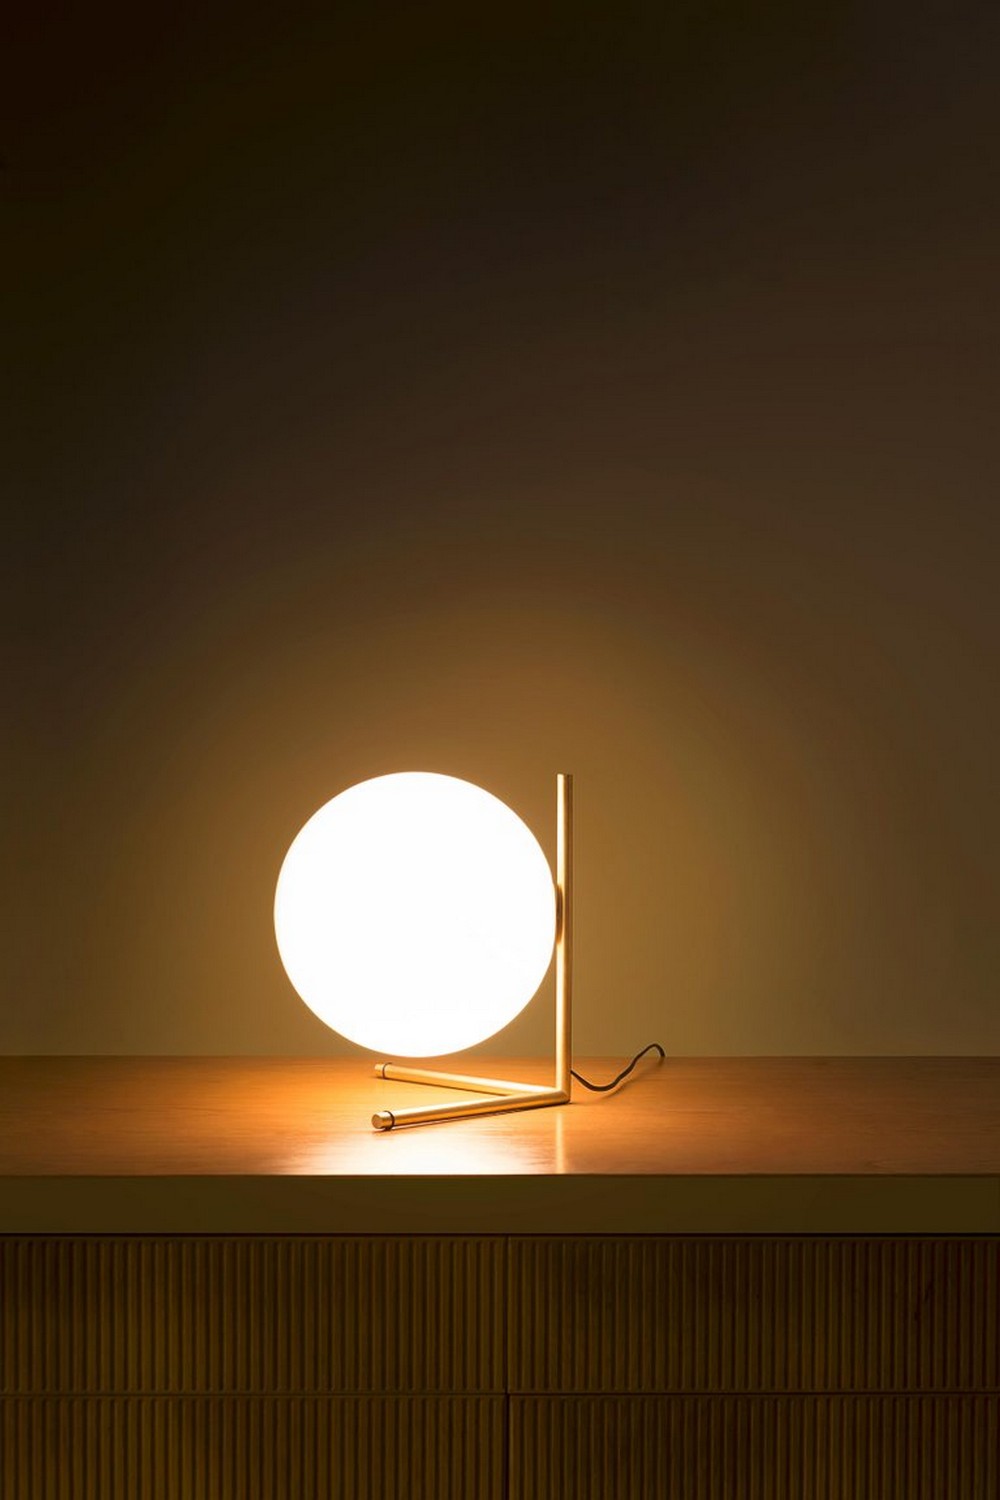 7 Bespoke Table Lamp Designs That Are At The 1stdibs Online Store